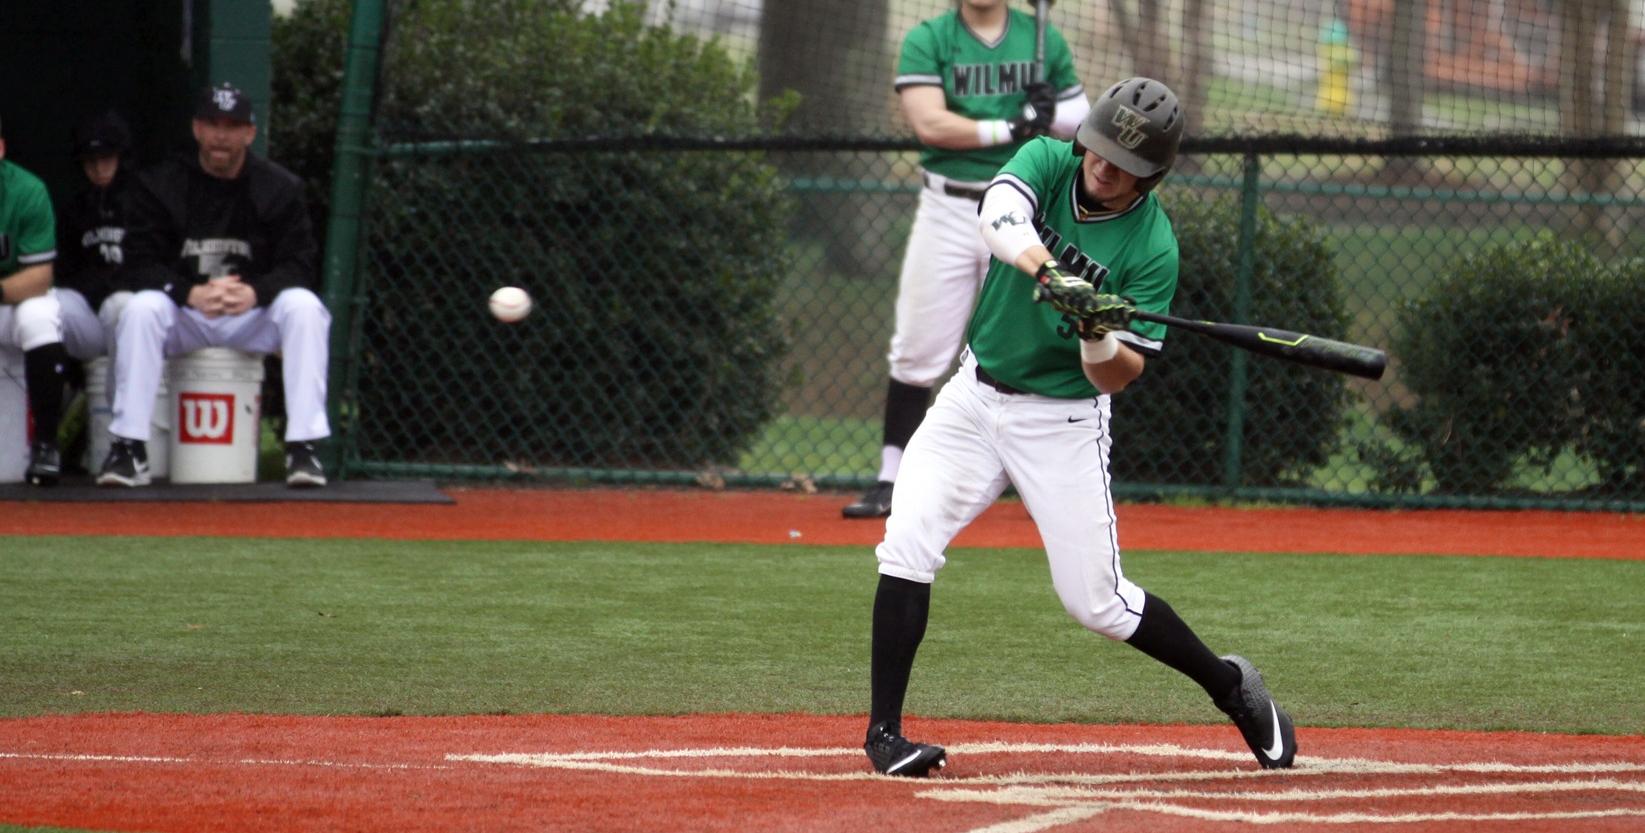 Copyright 2019; Wilmington University. All rights reserved. File photo of Max Carney who batted 4-for-5 against Florida National. Photo by Dan Lauletta. February 22, 2019 vs. Molloy at Myrtle Beach, S.C.